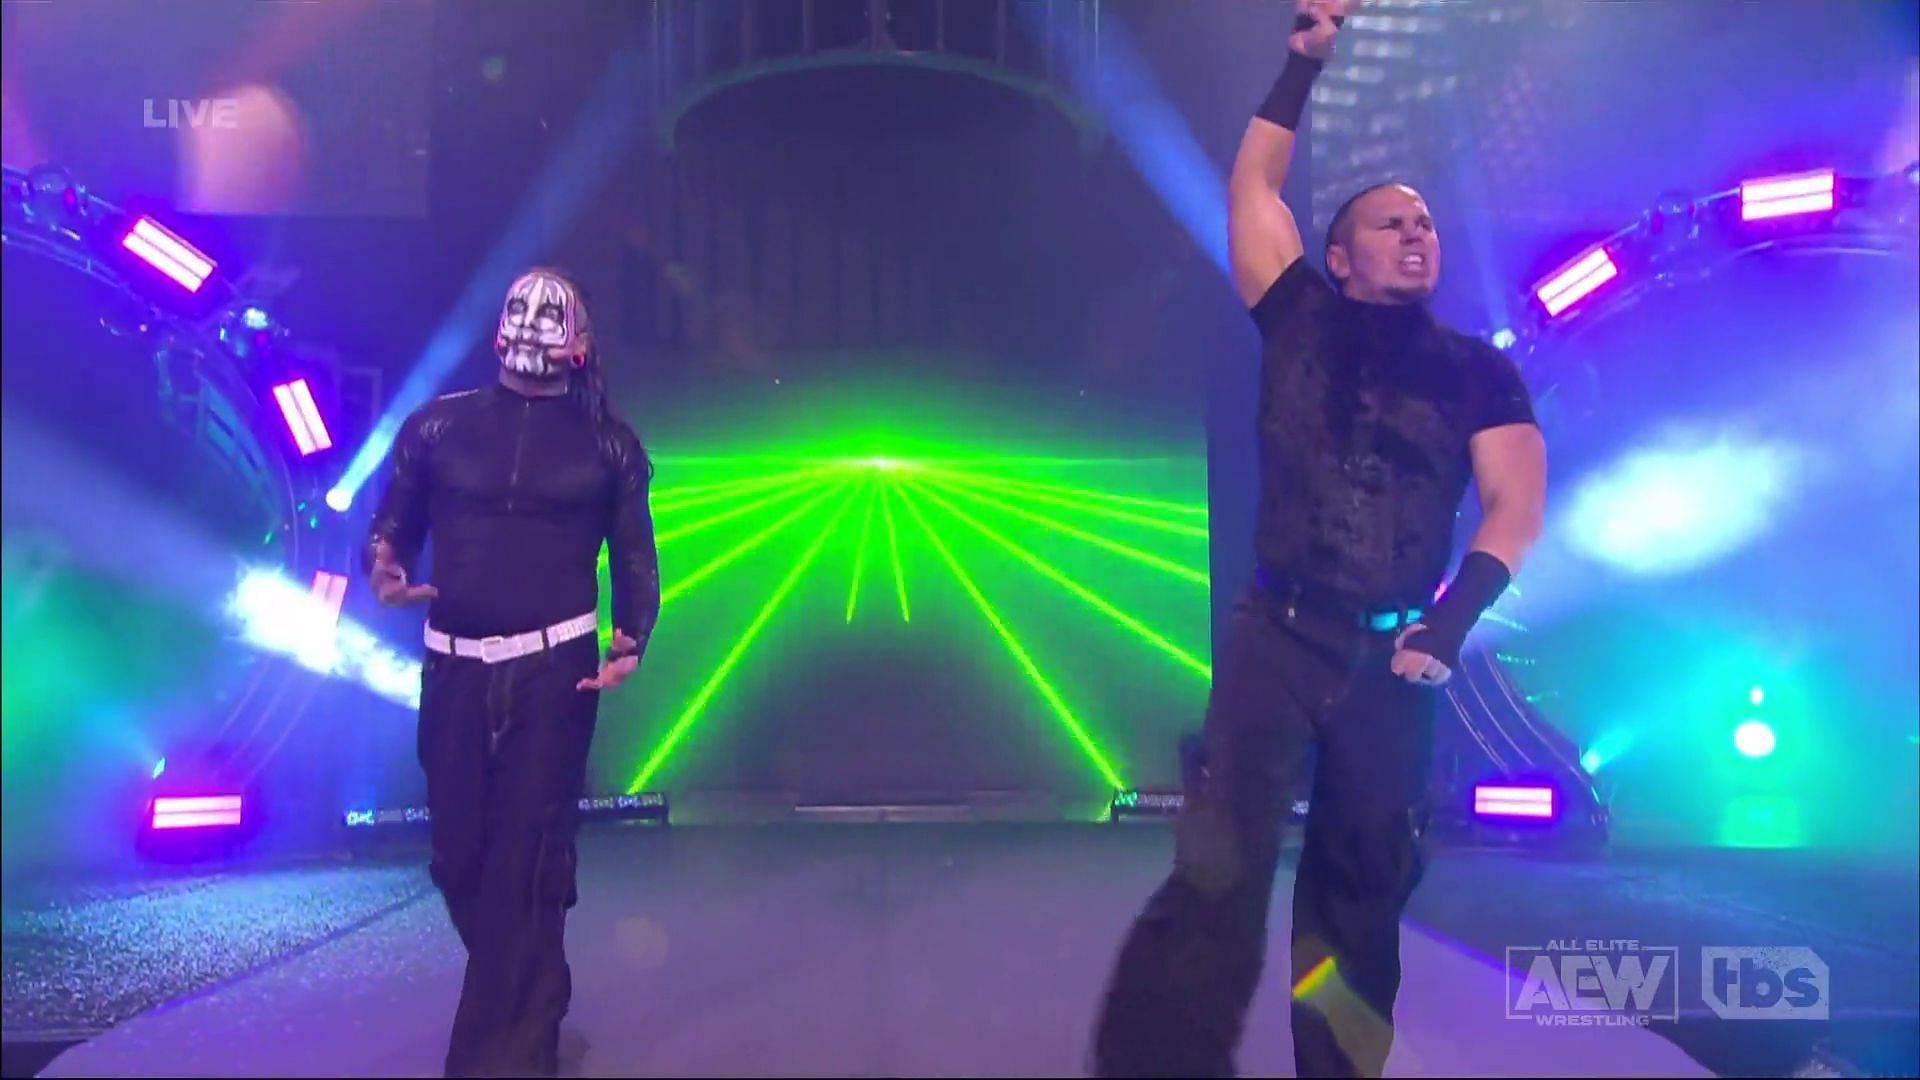 The Hardys during their second AEW match together